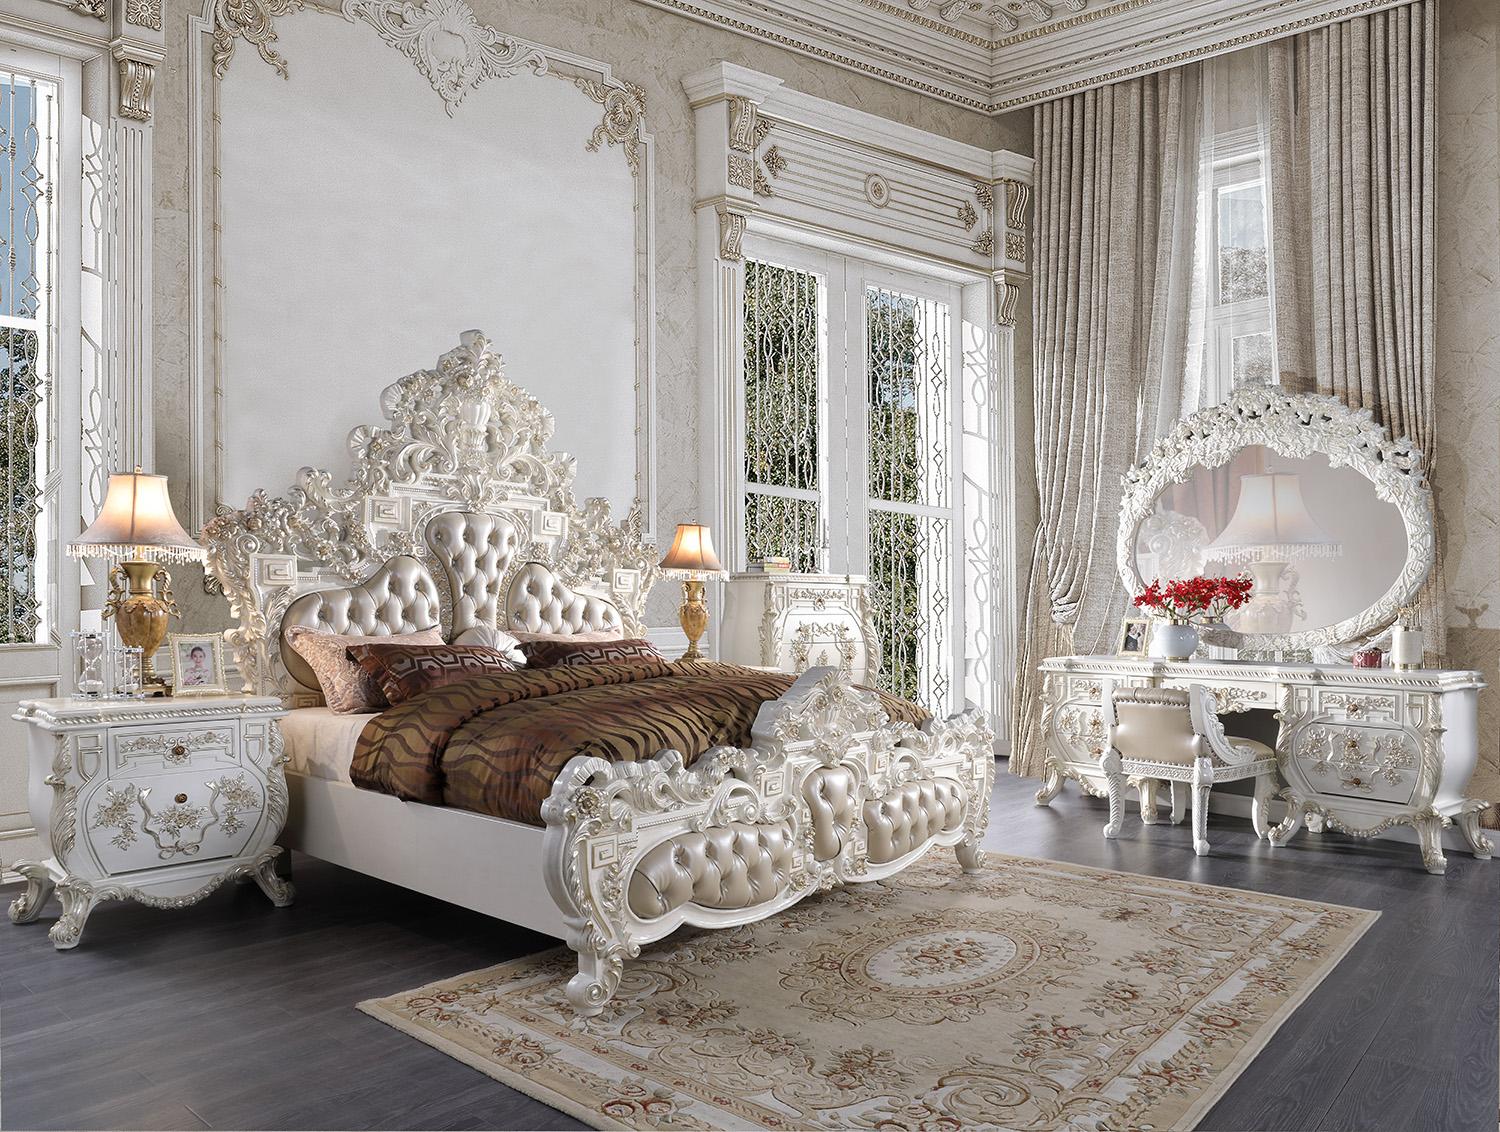 

    
Pearl Cream & White Tufted CAL KING Bedroom Set 5 Pcs Traditional Homey Design HD-1807
